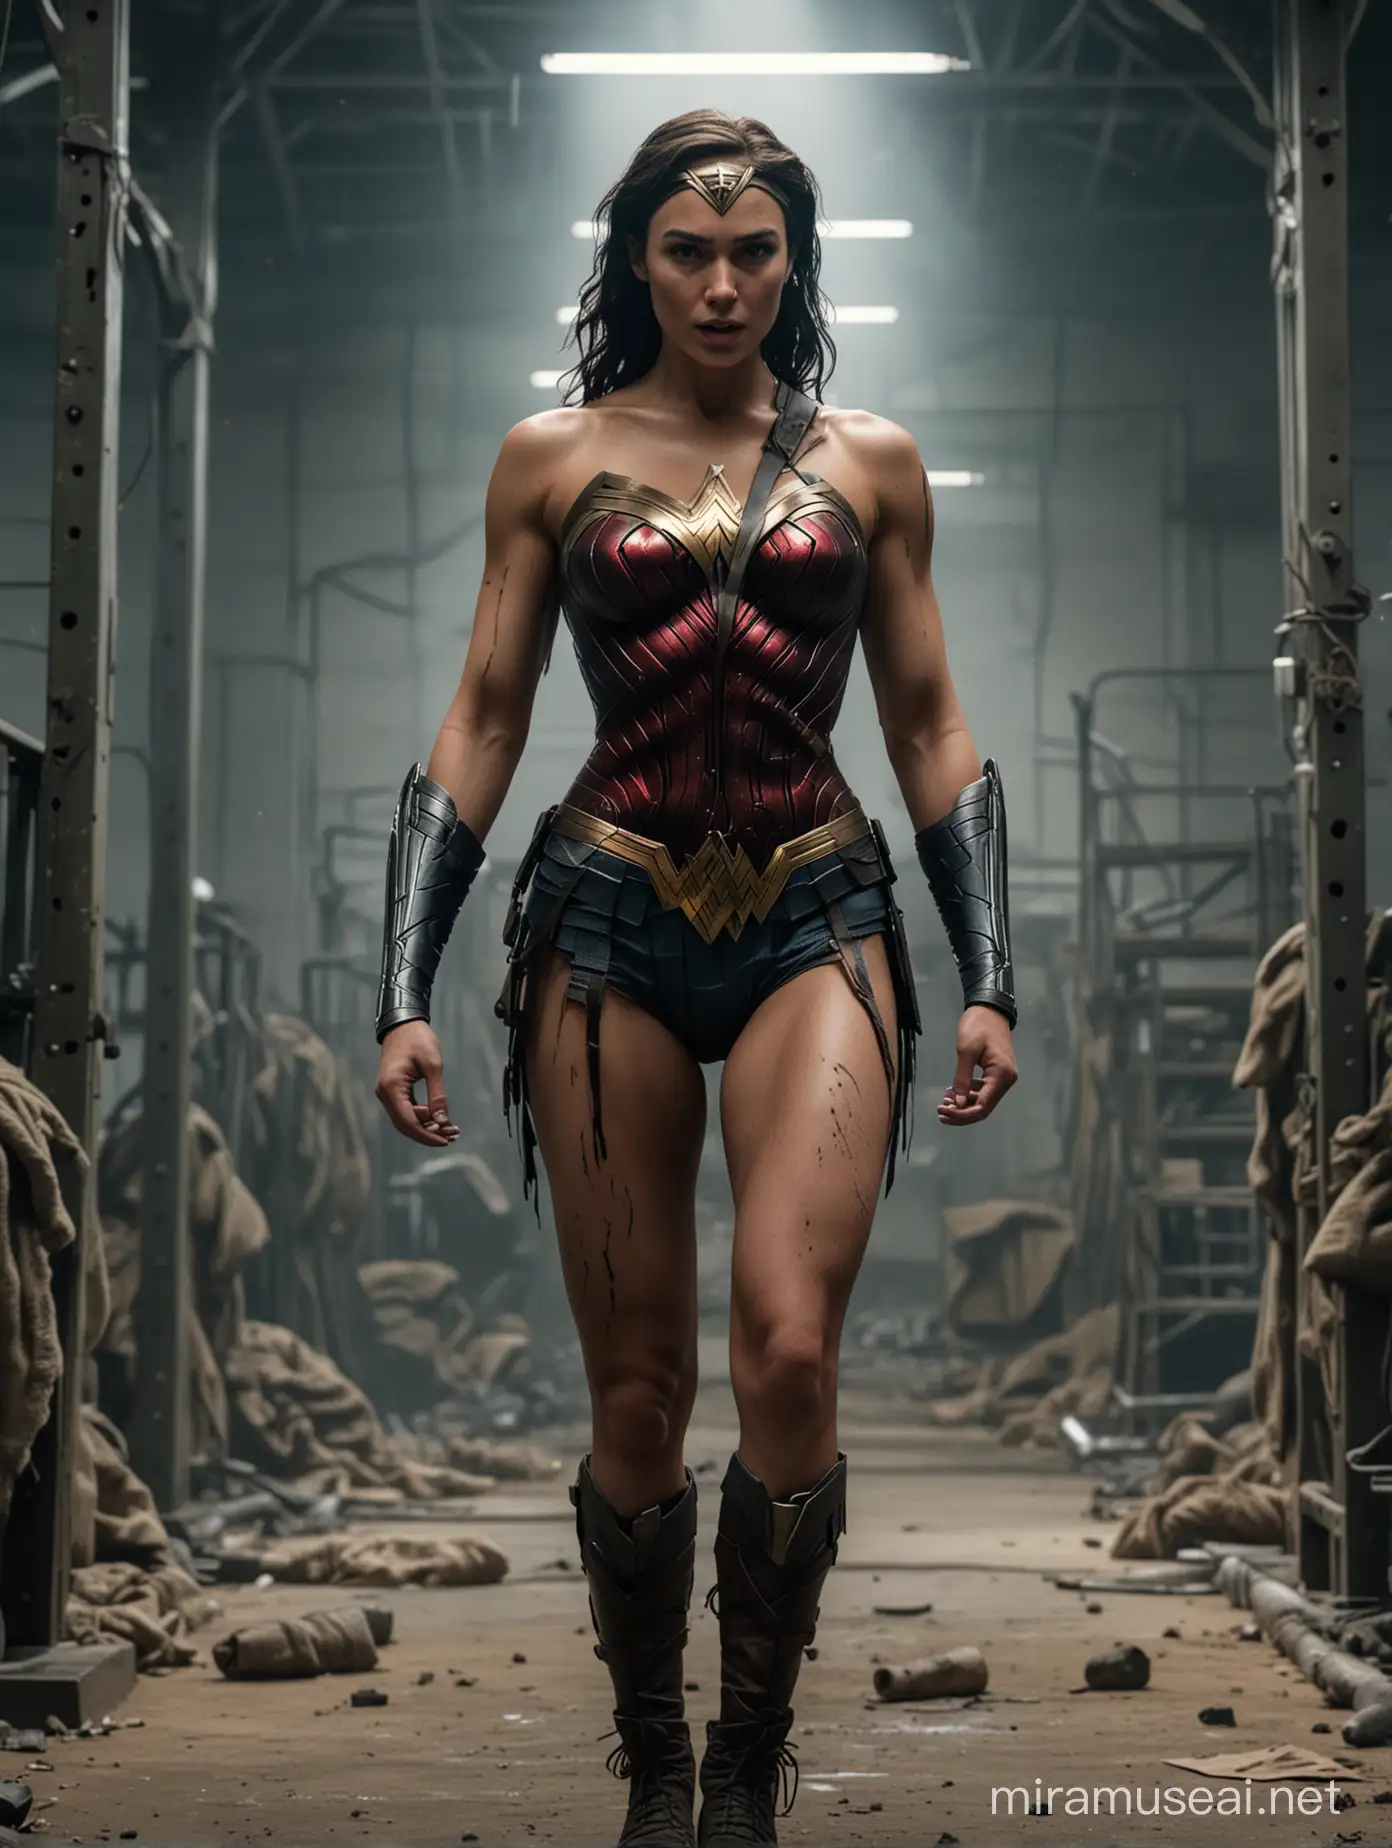 Gal Gadot as Wonder Woman Stands Tall in Military Barrack